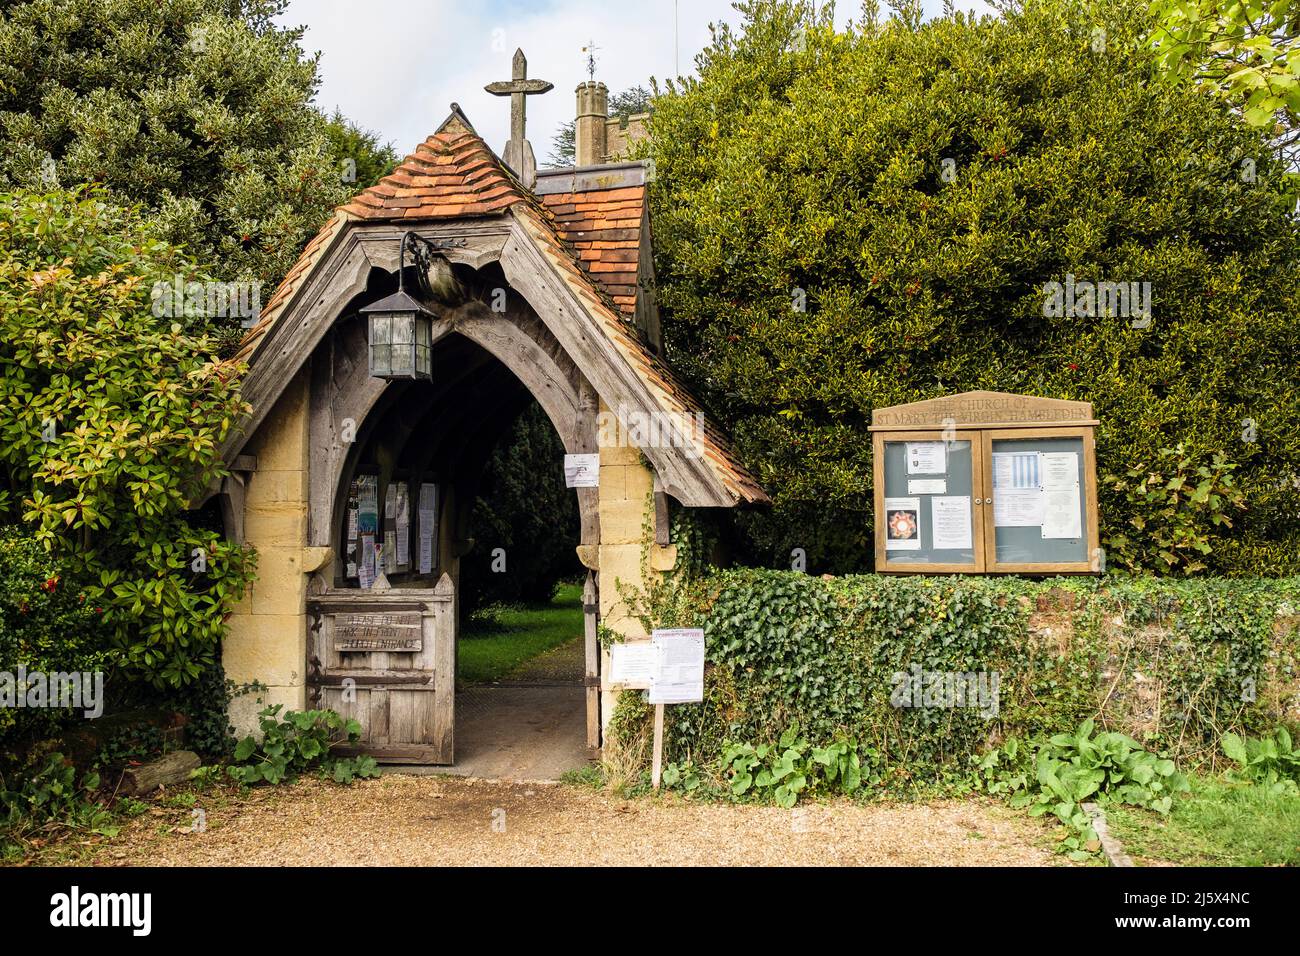 St Mary The Virgin Church Lychgate and notice board in Chilterns village of Hambleden, Buckinghamshire, Angleterre, Royaume-Uni, Grande-Bretagne Banque D'Images